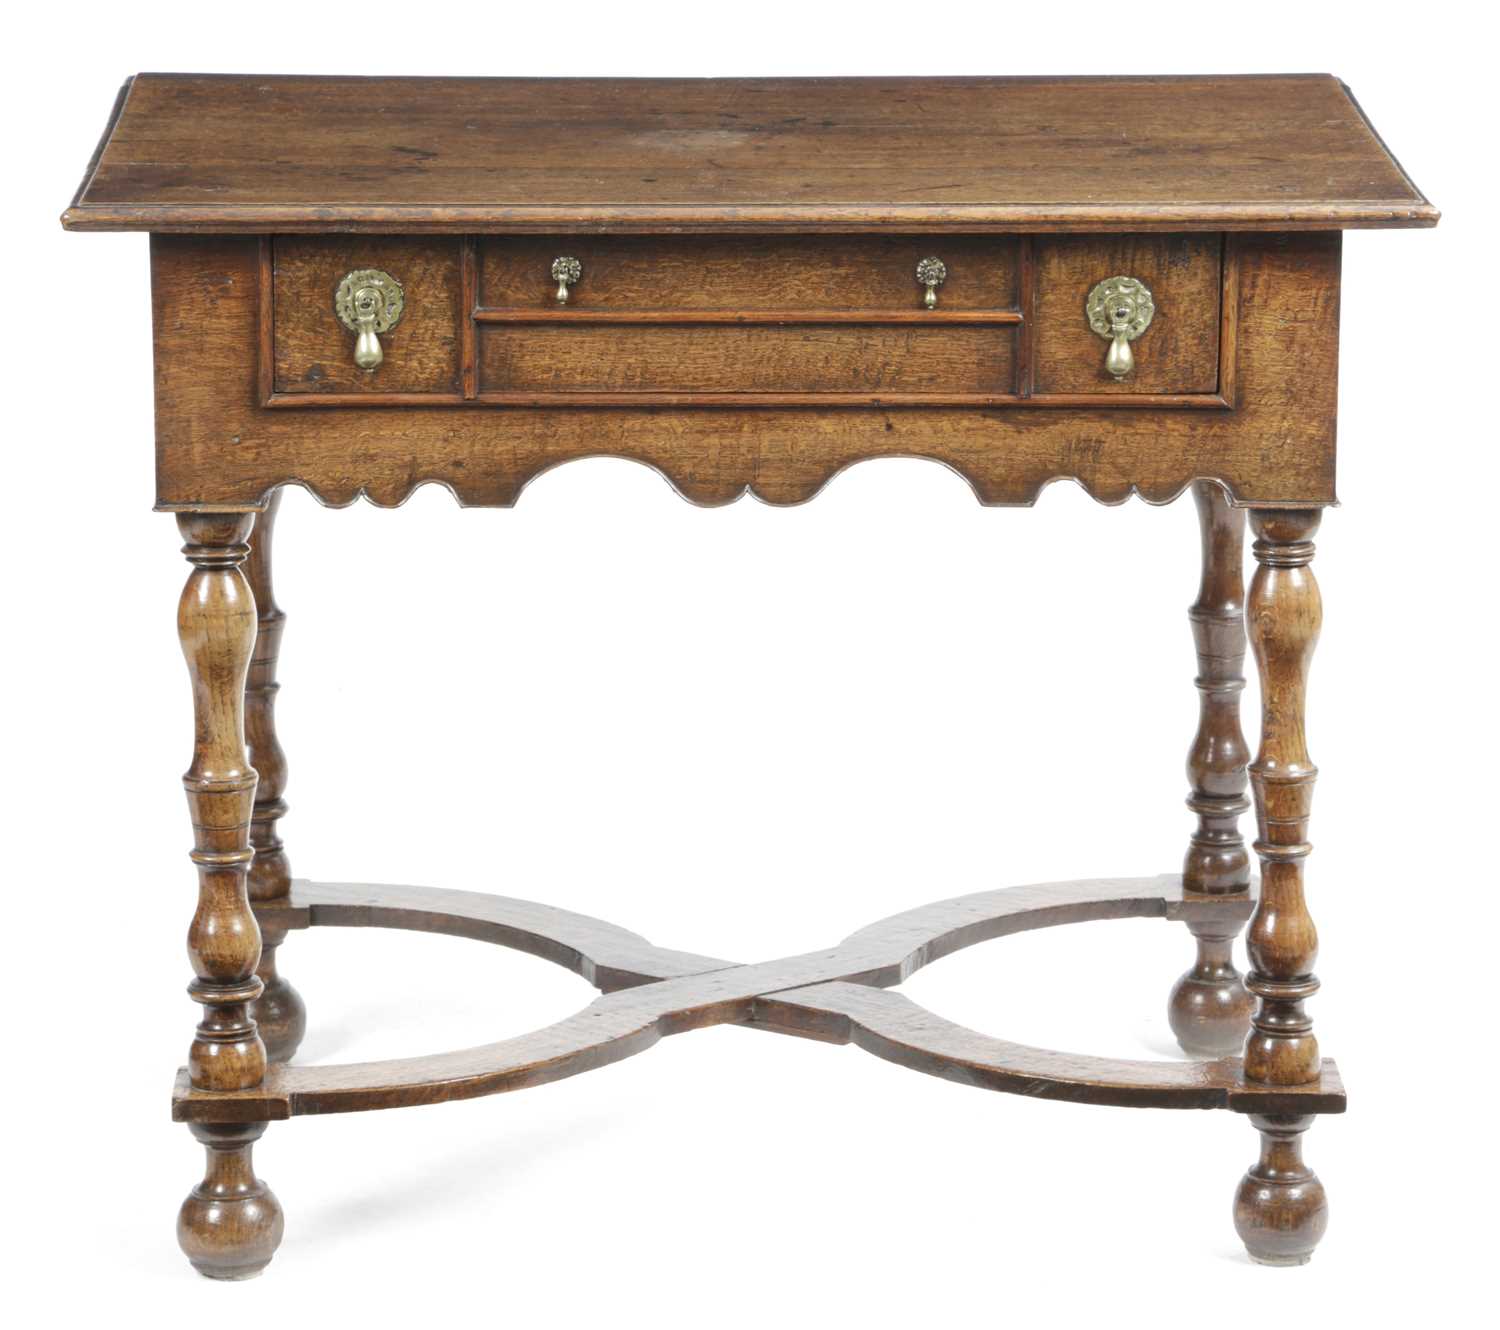 A WILLIAM AND MARY OAK SIDE TABLE LATE 17TH CENTURY the rectangular top above a single drawer with